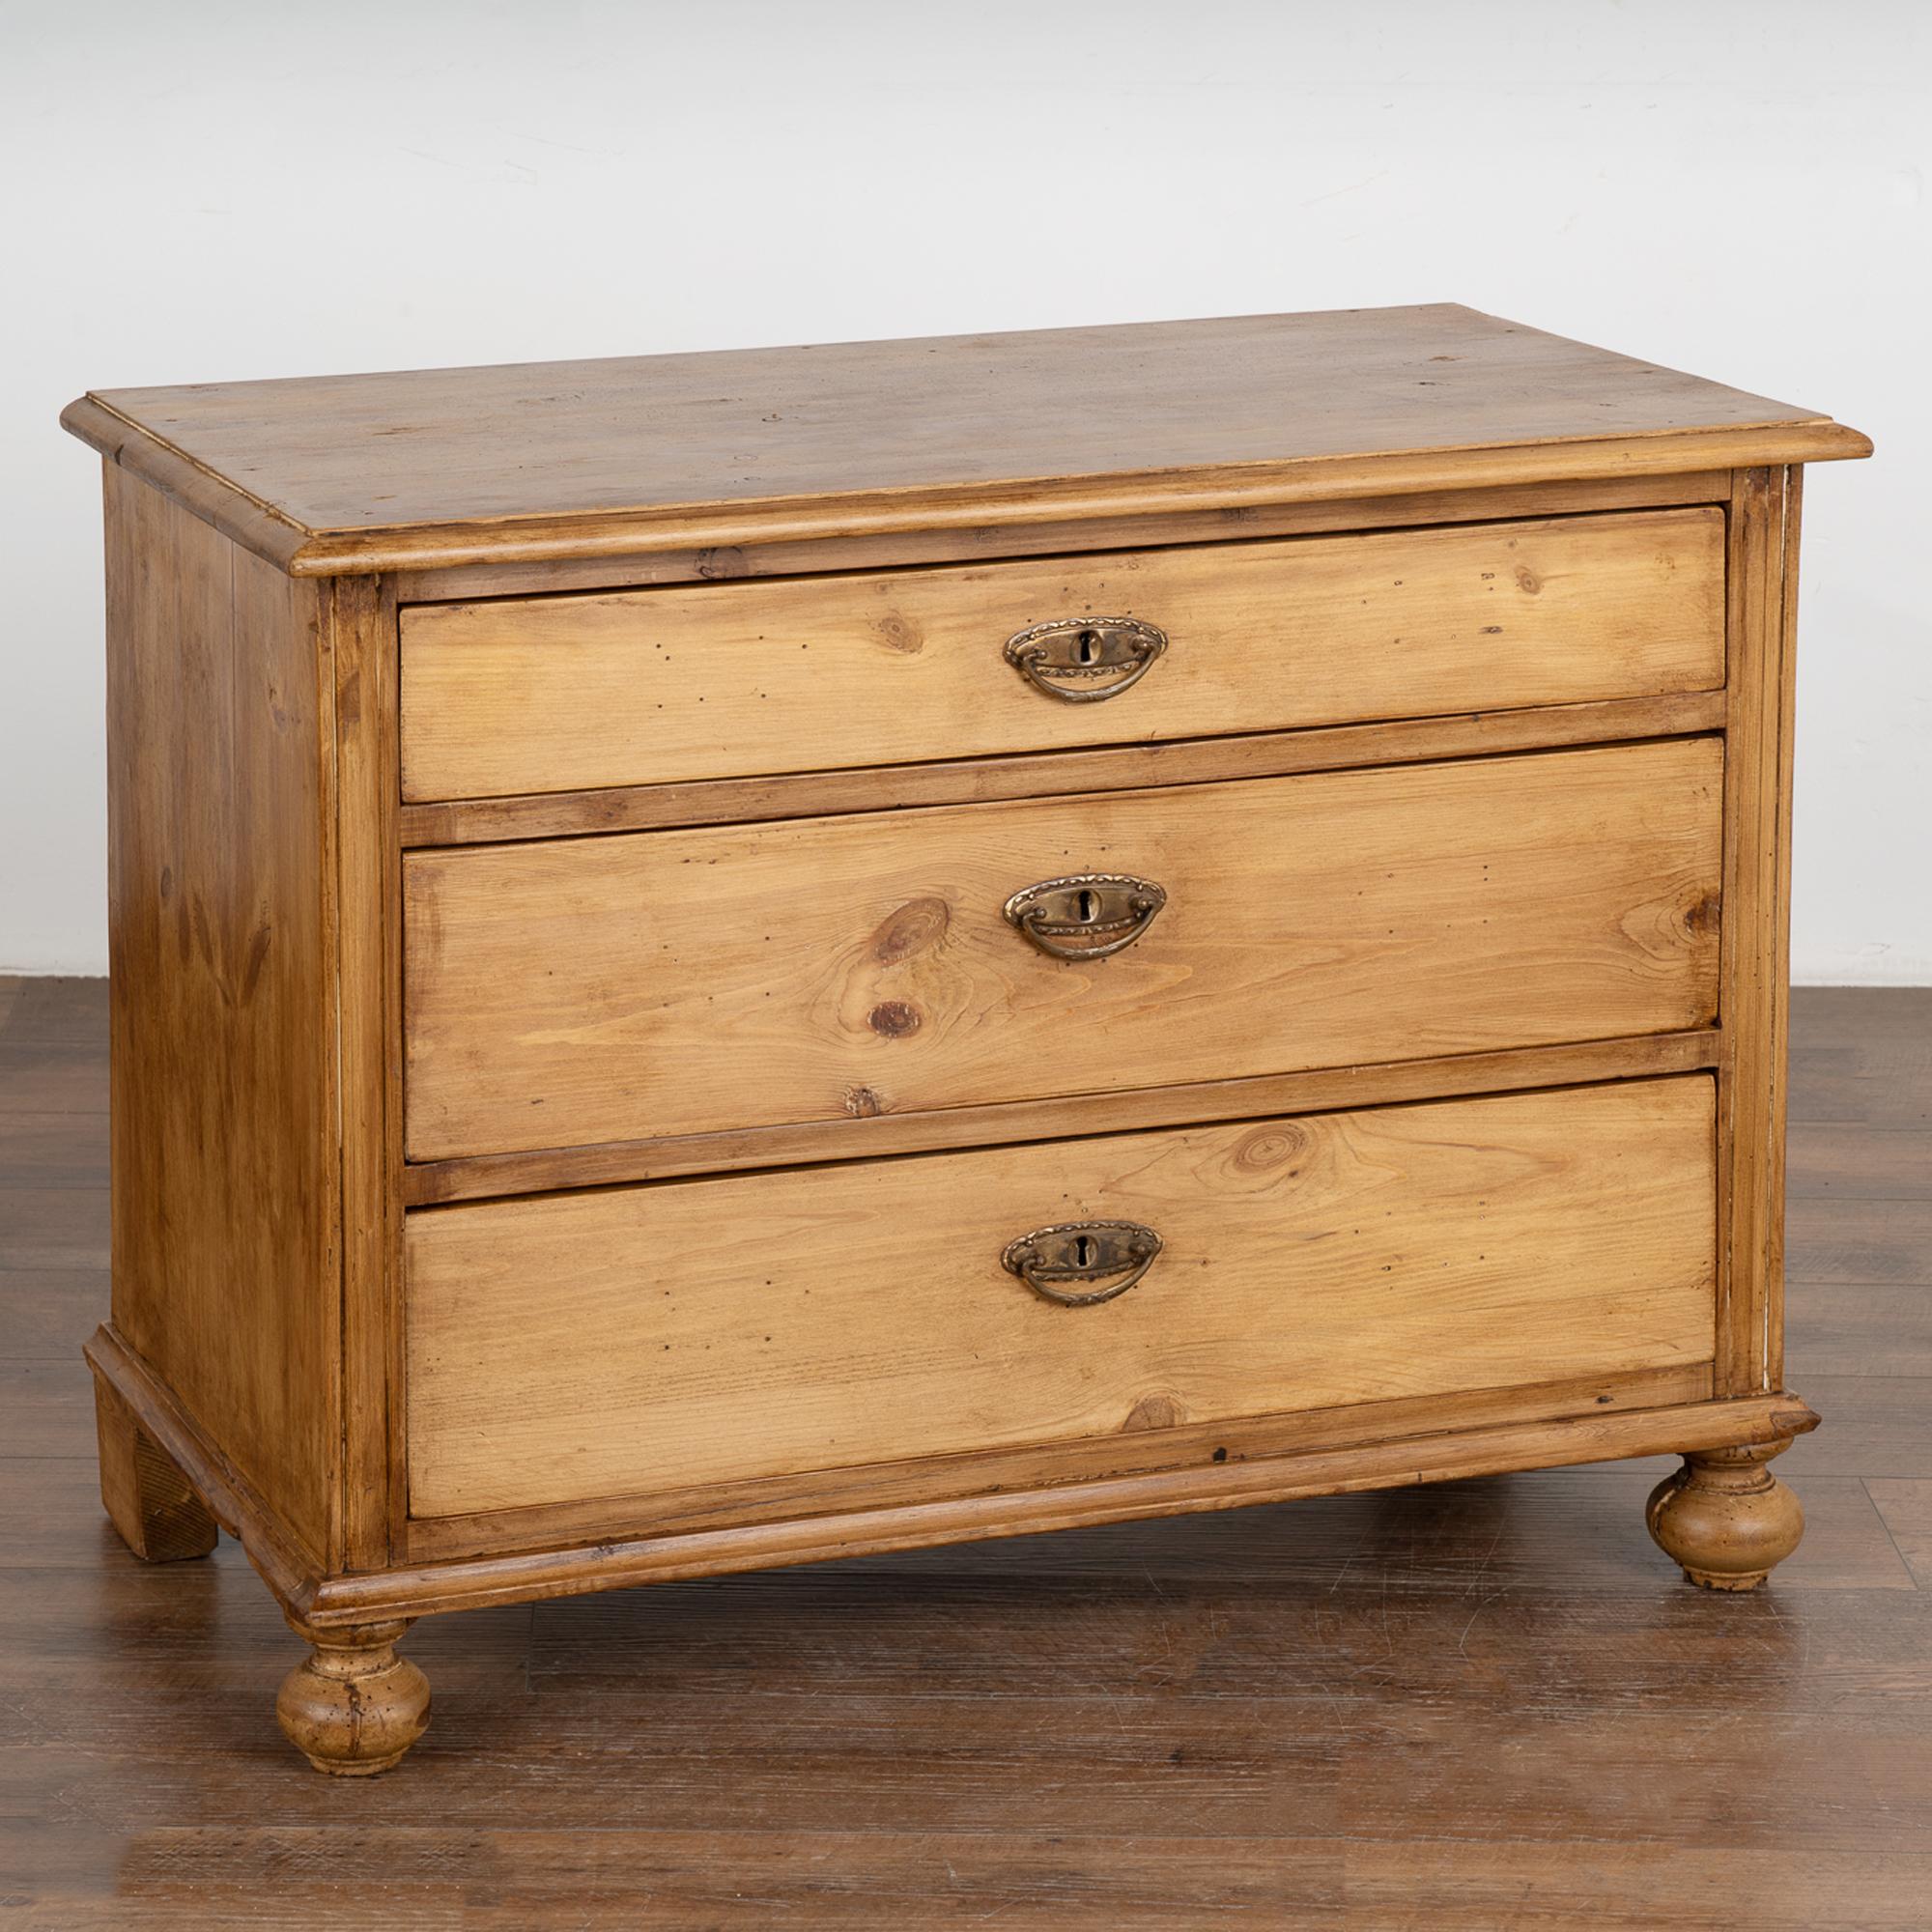 This small pine chest of three drawers has been given a waxed finish, bringing out the warmth of the pine. 
Note the craftsmanship in the dovetail joints of the drawers and original bun feet in front, block feet in rear.
Restored, this chest is